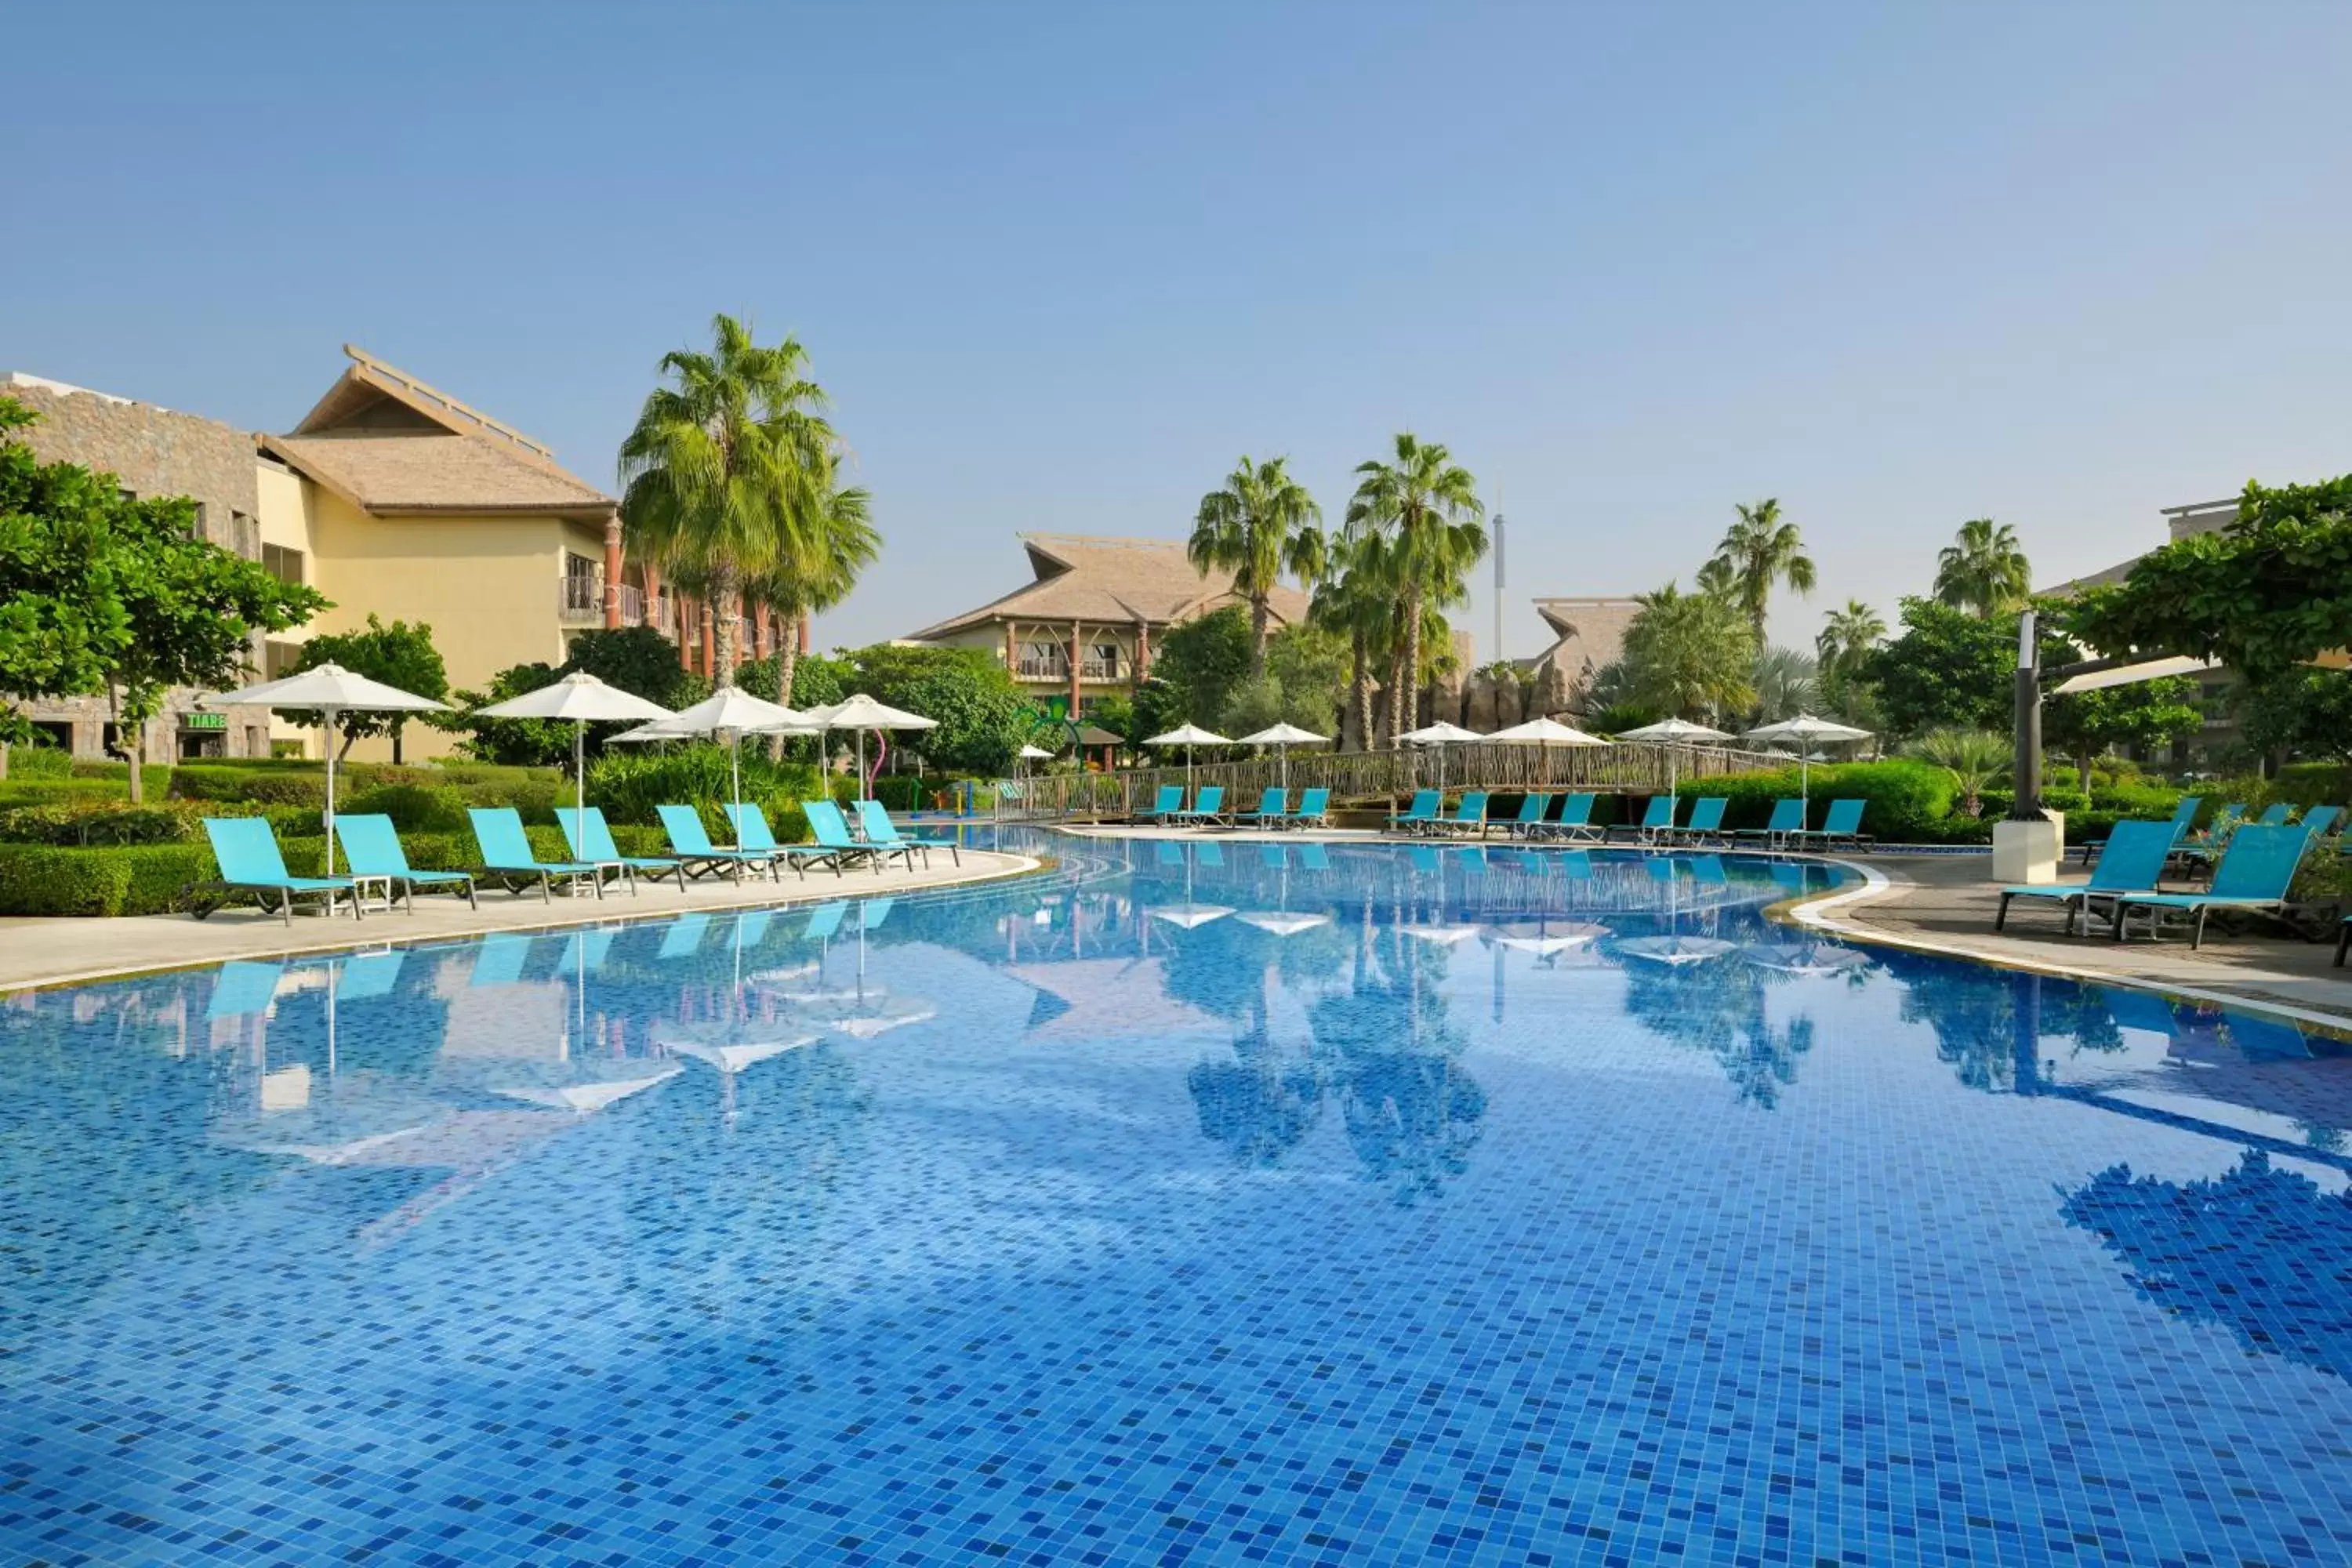 Day, Swimming Pool in Lapita, Dubai Parks and Resorts, Autograph Collection